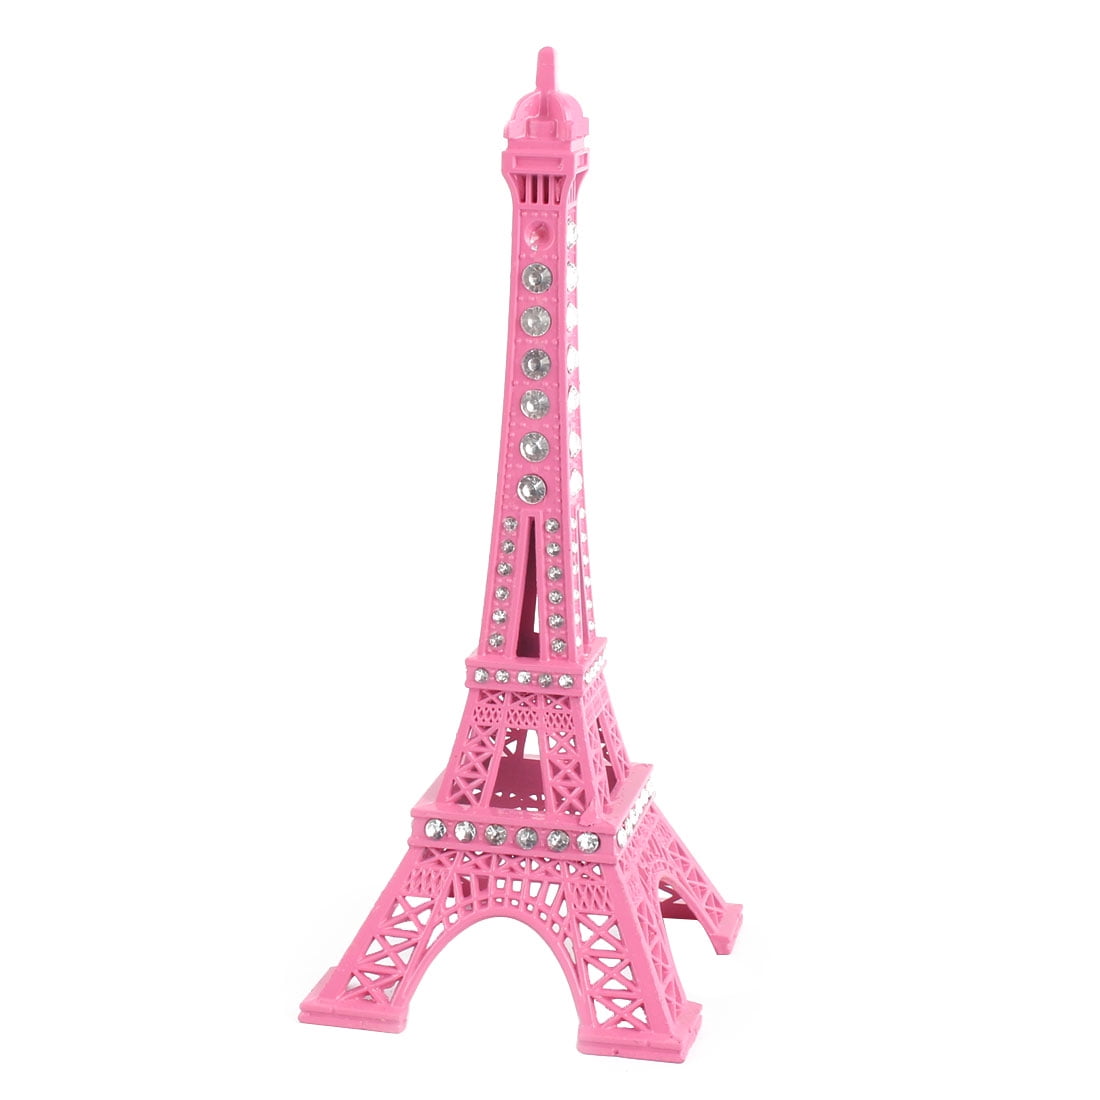 8 cm Statue of the Eiffel Tower in Paris Model-Home for Christmas Decoration Hot 